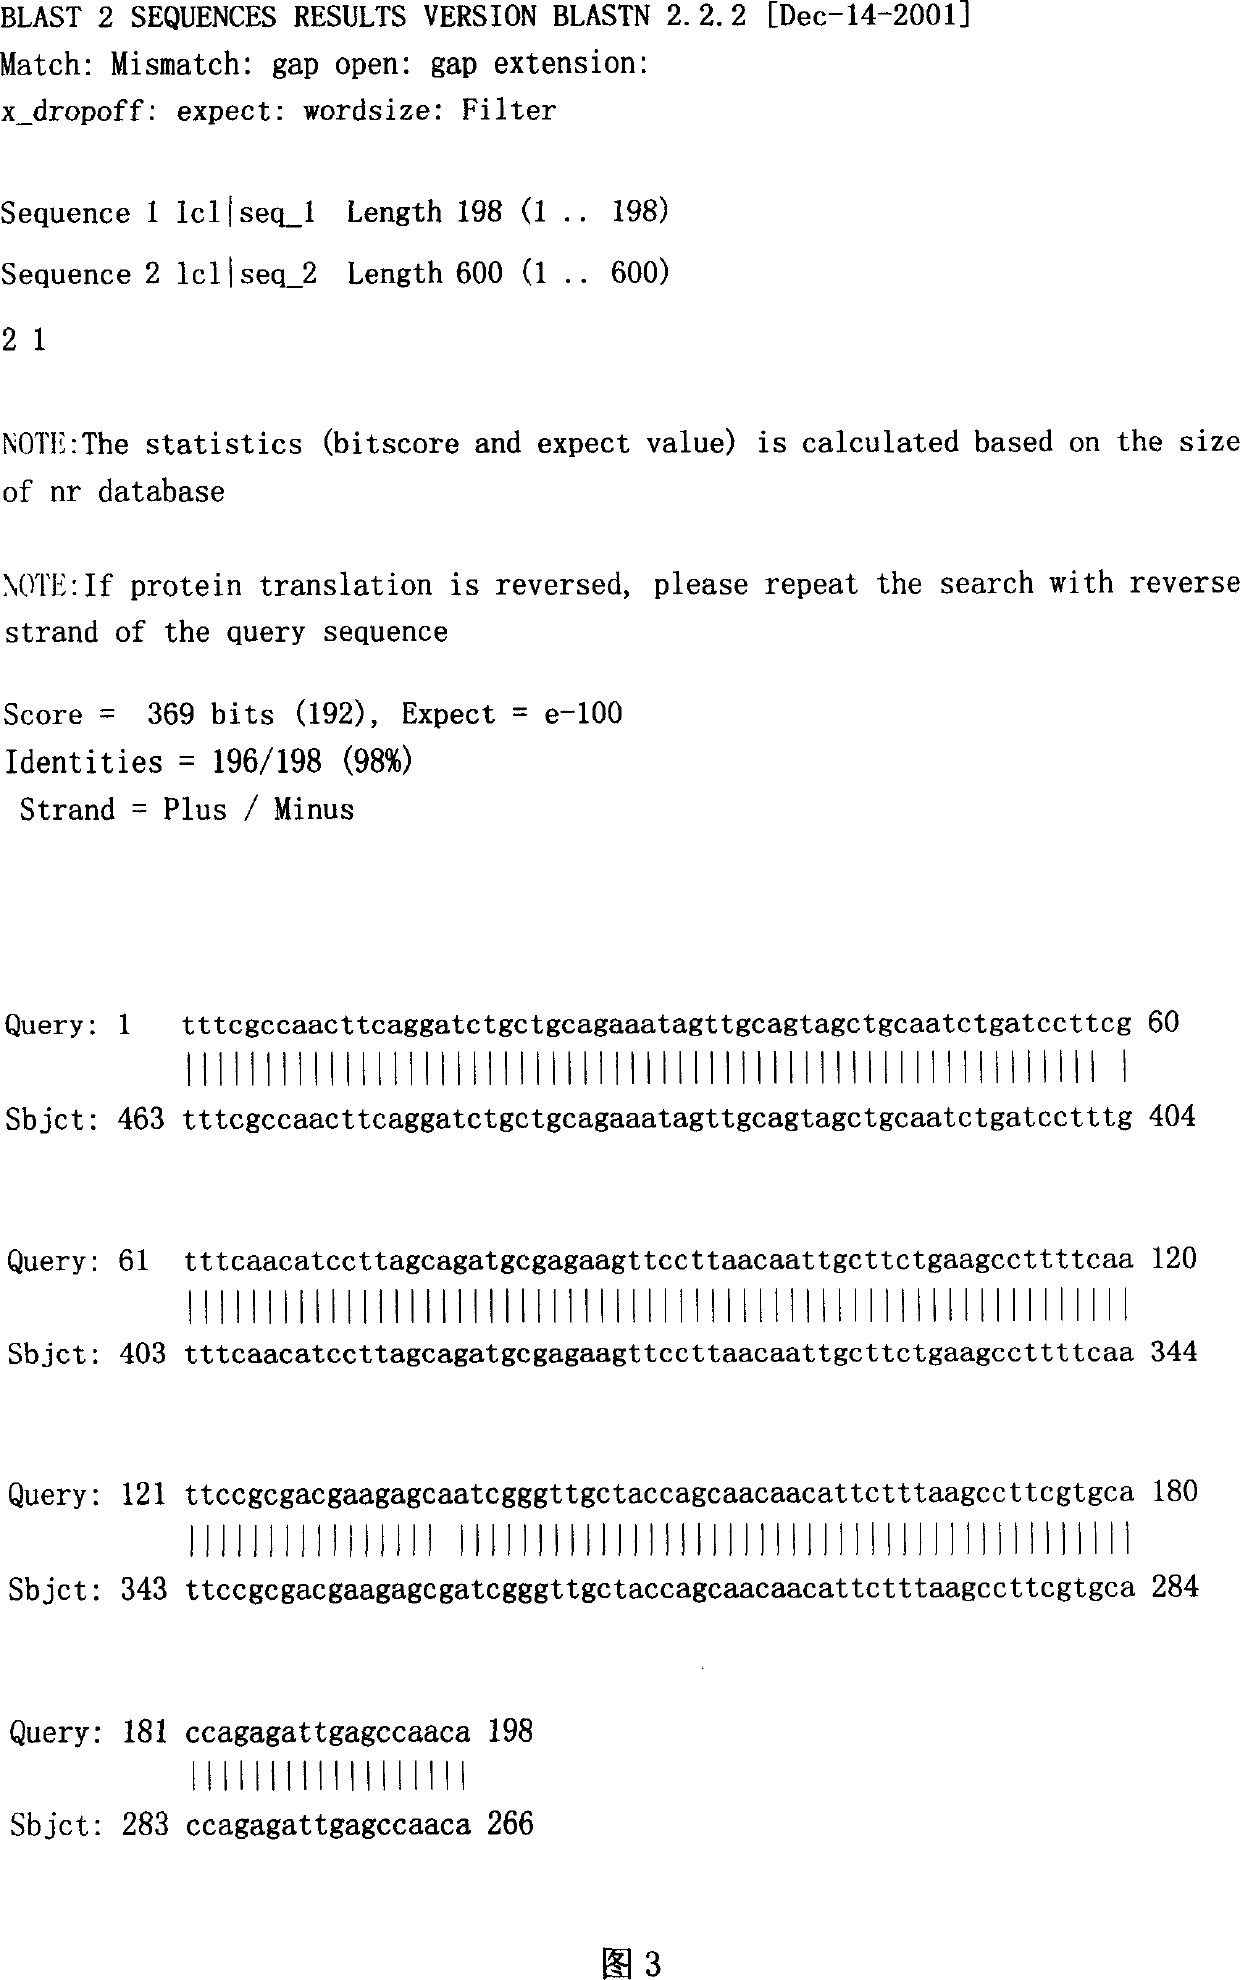 Determination of one section vagina bacillus Gardner DNA sequence (3) specificity and its application